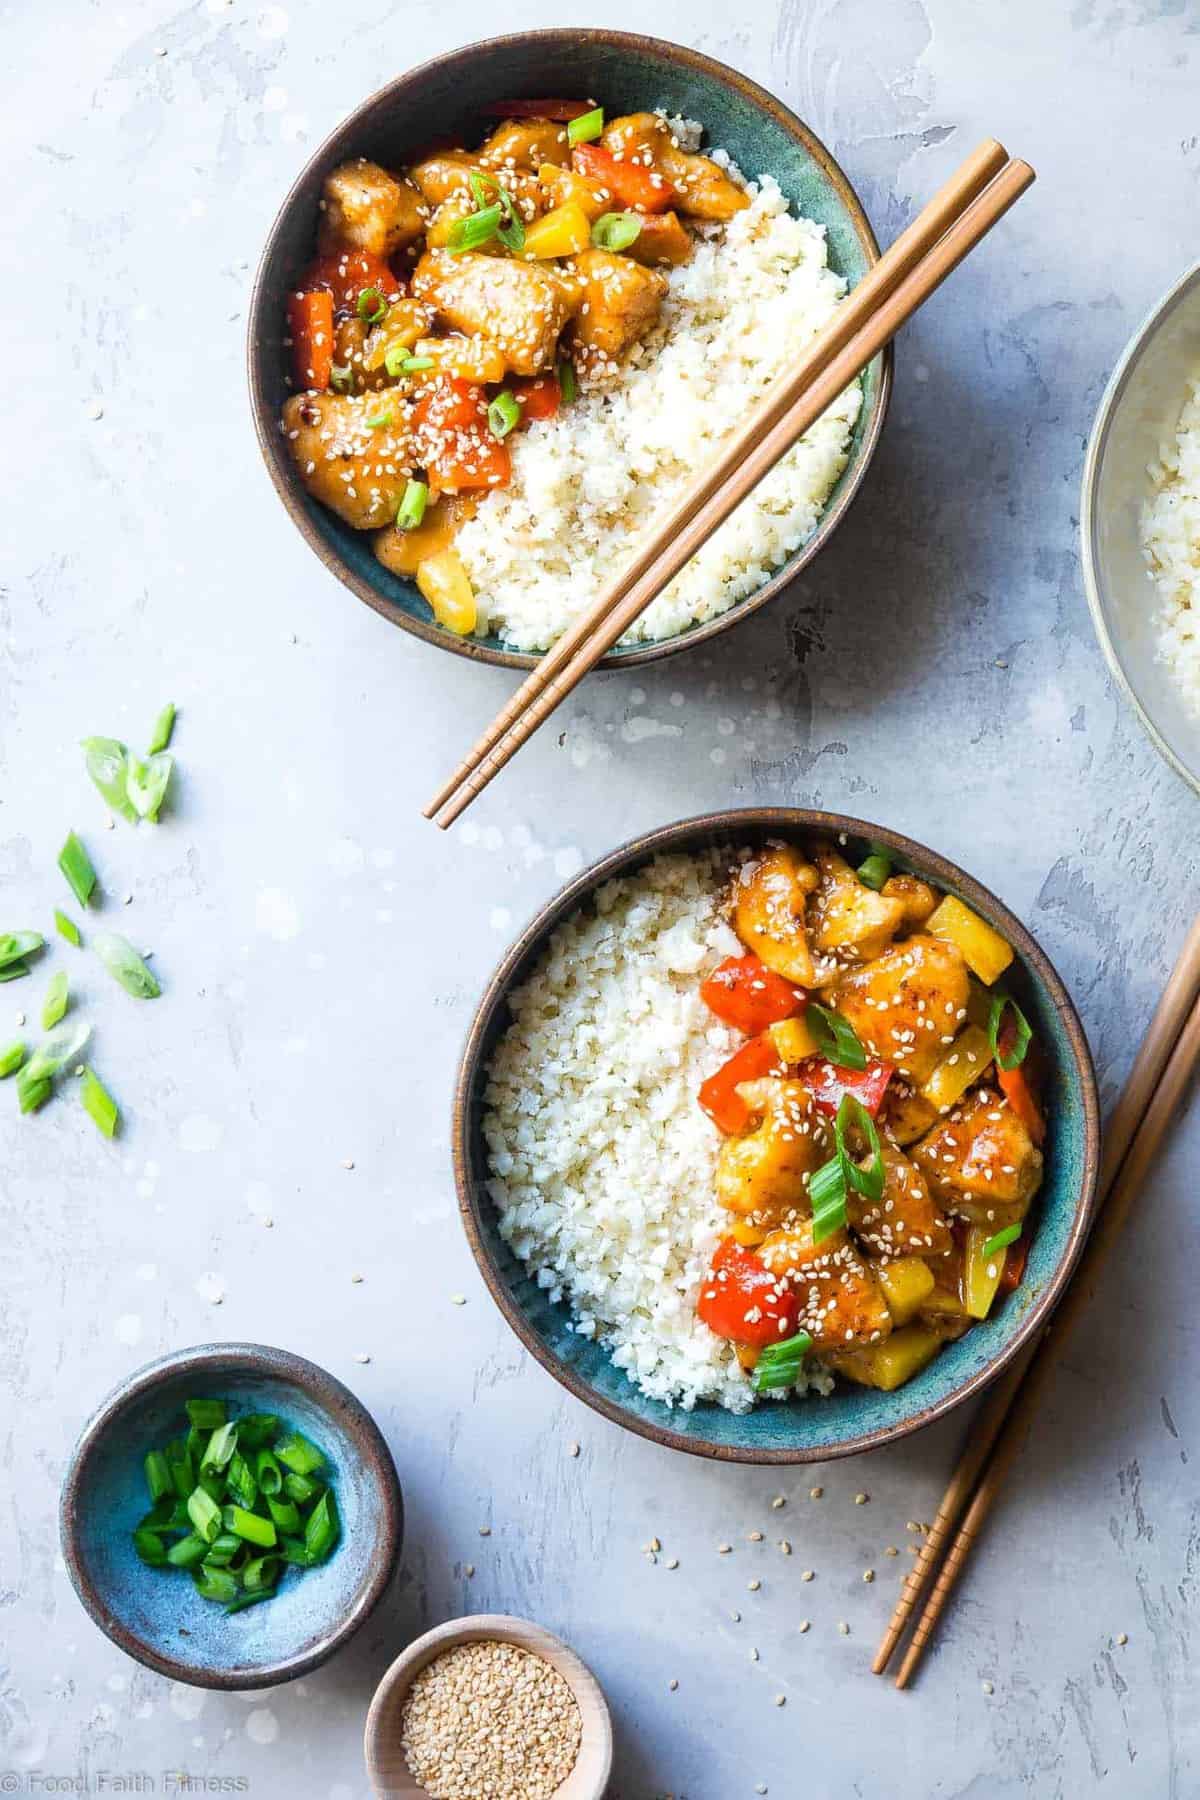 Gluten Free Whole30 Sweet and Sour Chicken - This paleo friendly, healthy sweet and sour chicken is so easy to make and tastes better than takeout and is WAY better for you! It's sugar/grain/gluten/dairy/egg free too! | #Foodfaithfitness | 